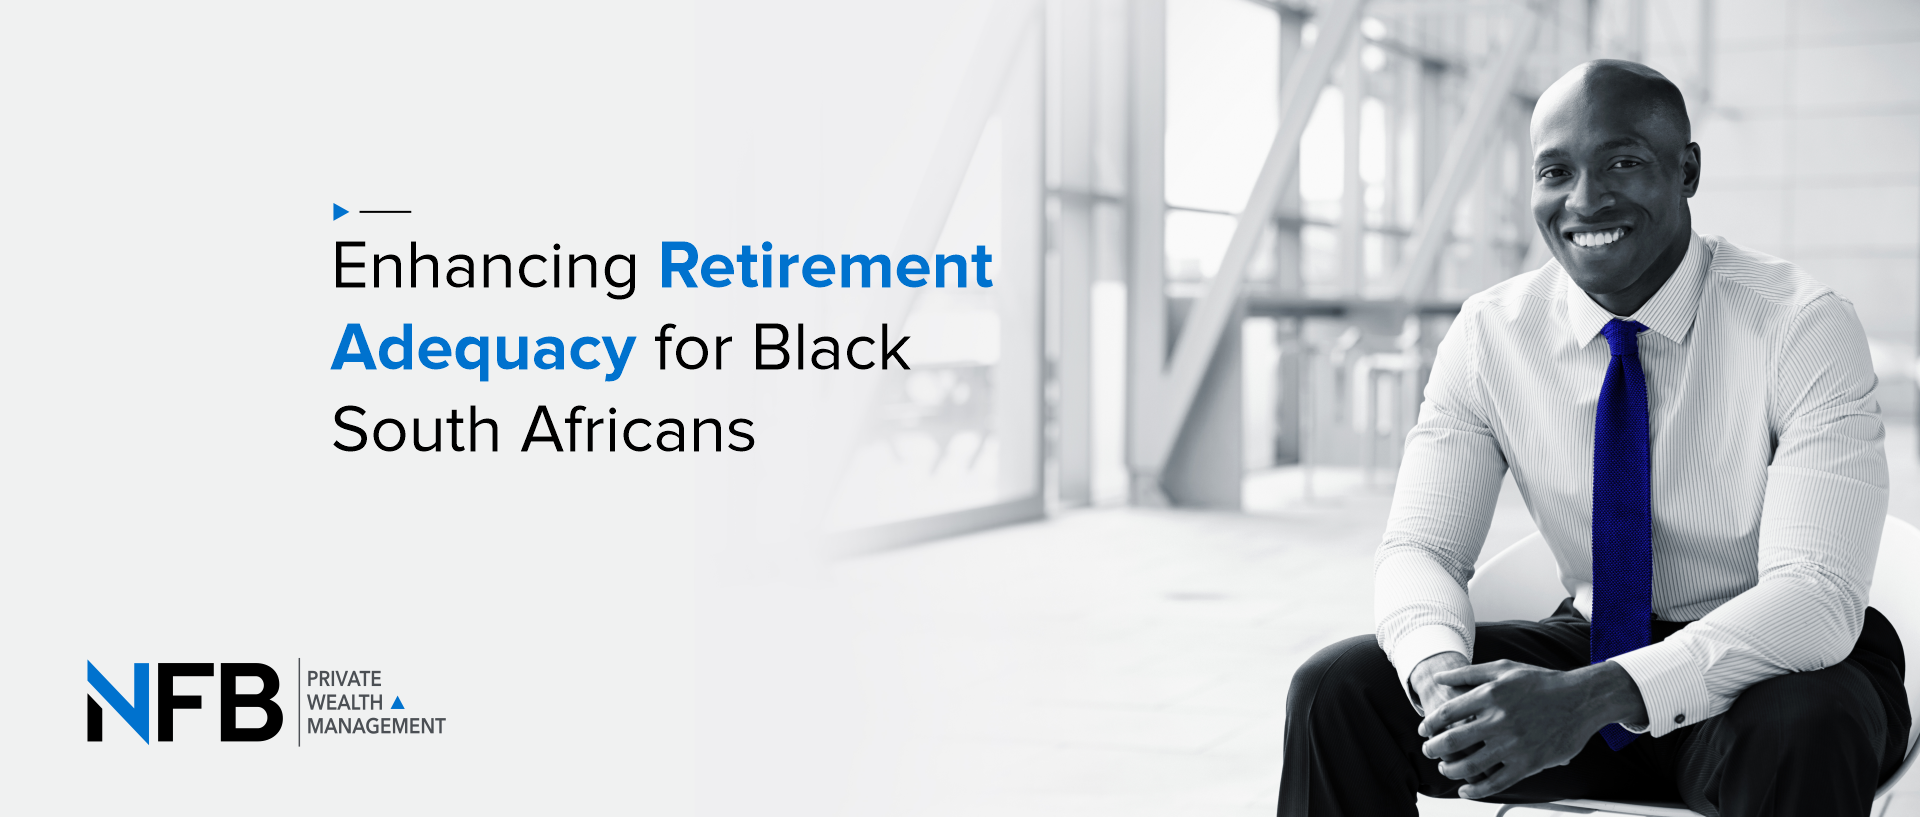 Enhancing Retirement Adequacy for Black South Africans